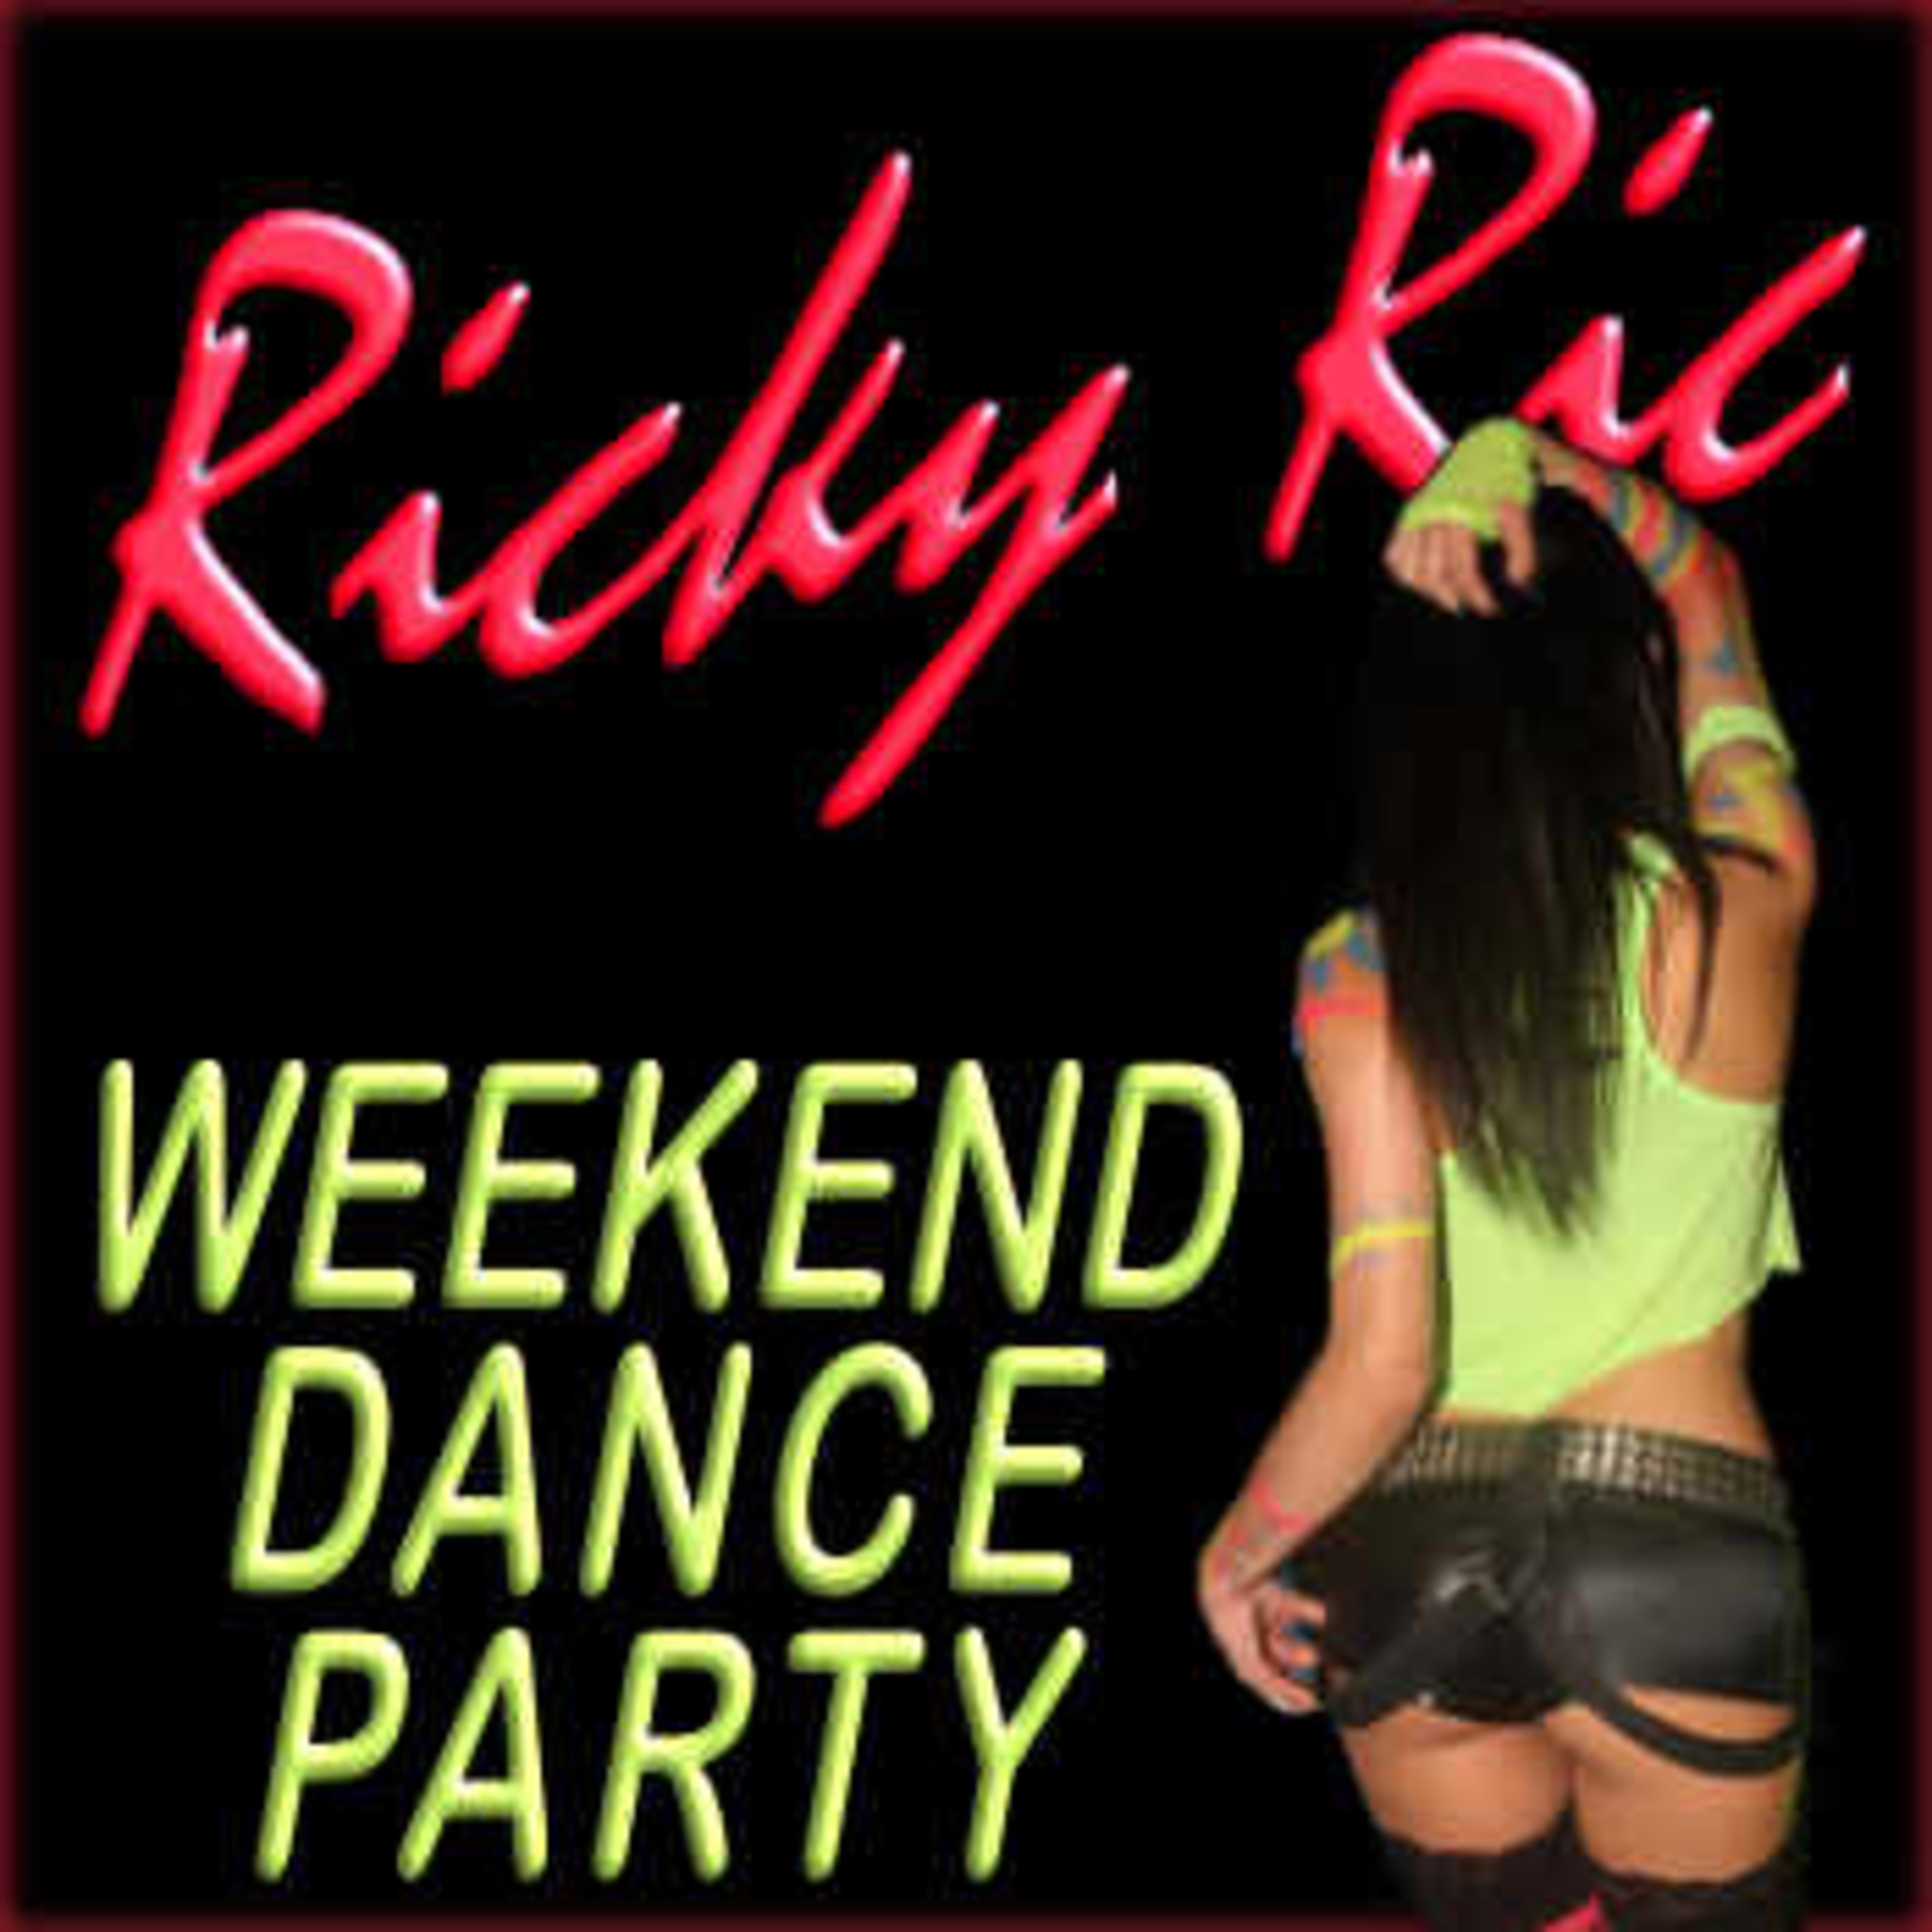 Ricky Ric's Weekend Dance Party